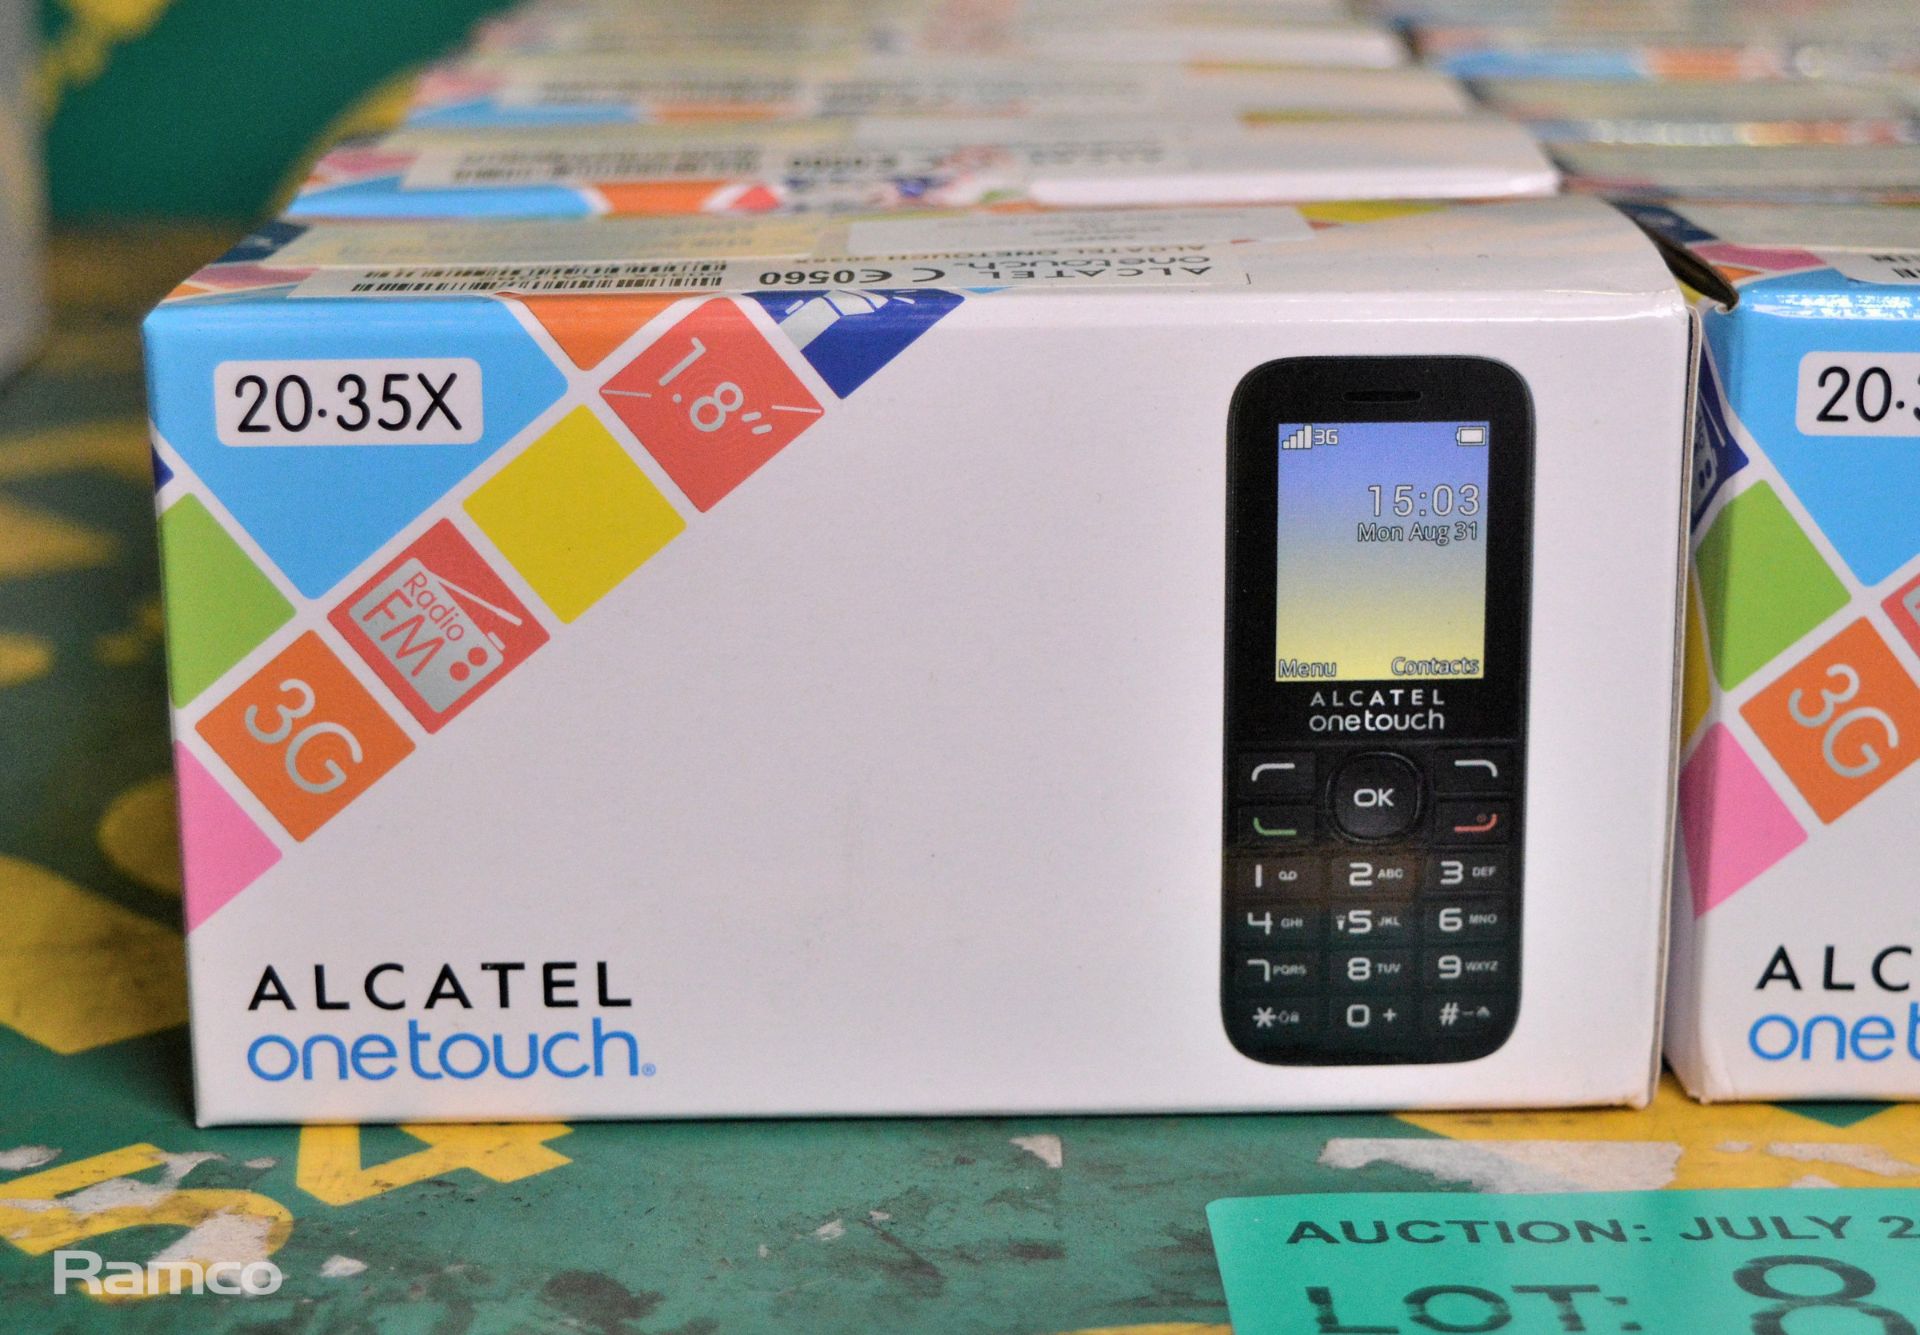 10x Alcatel 2035X One Touch Mobile Phones - Image 2 of 2